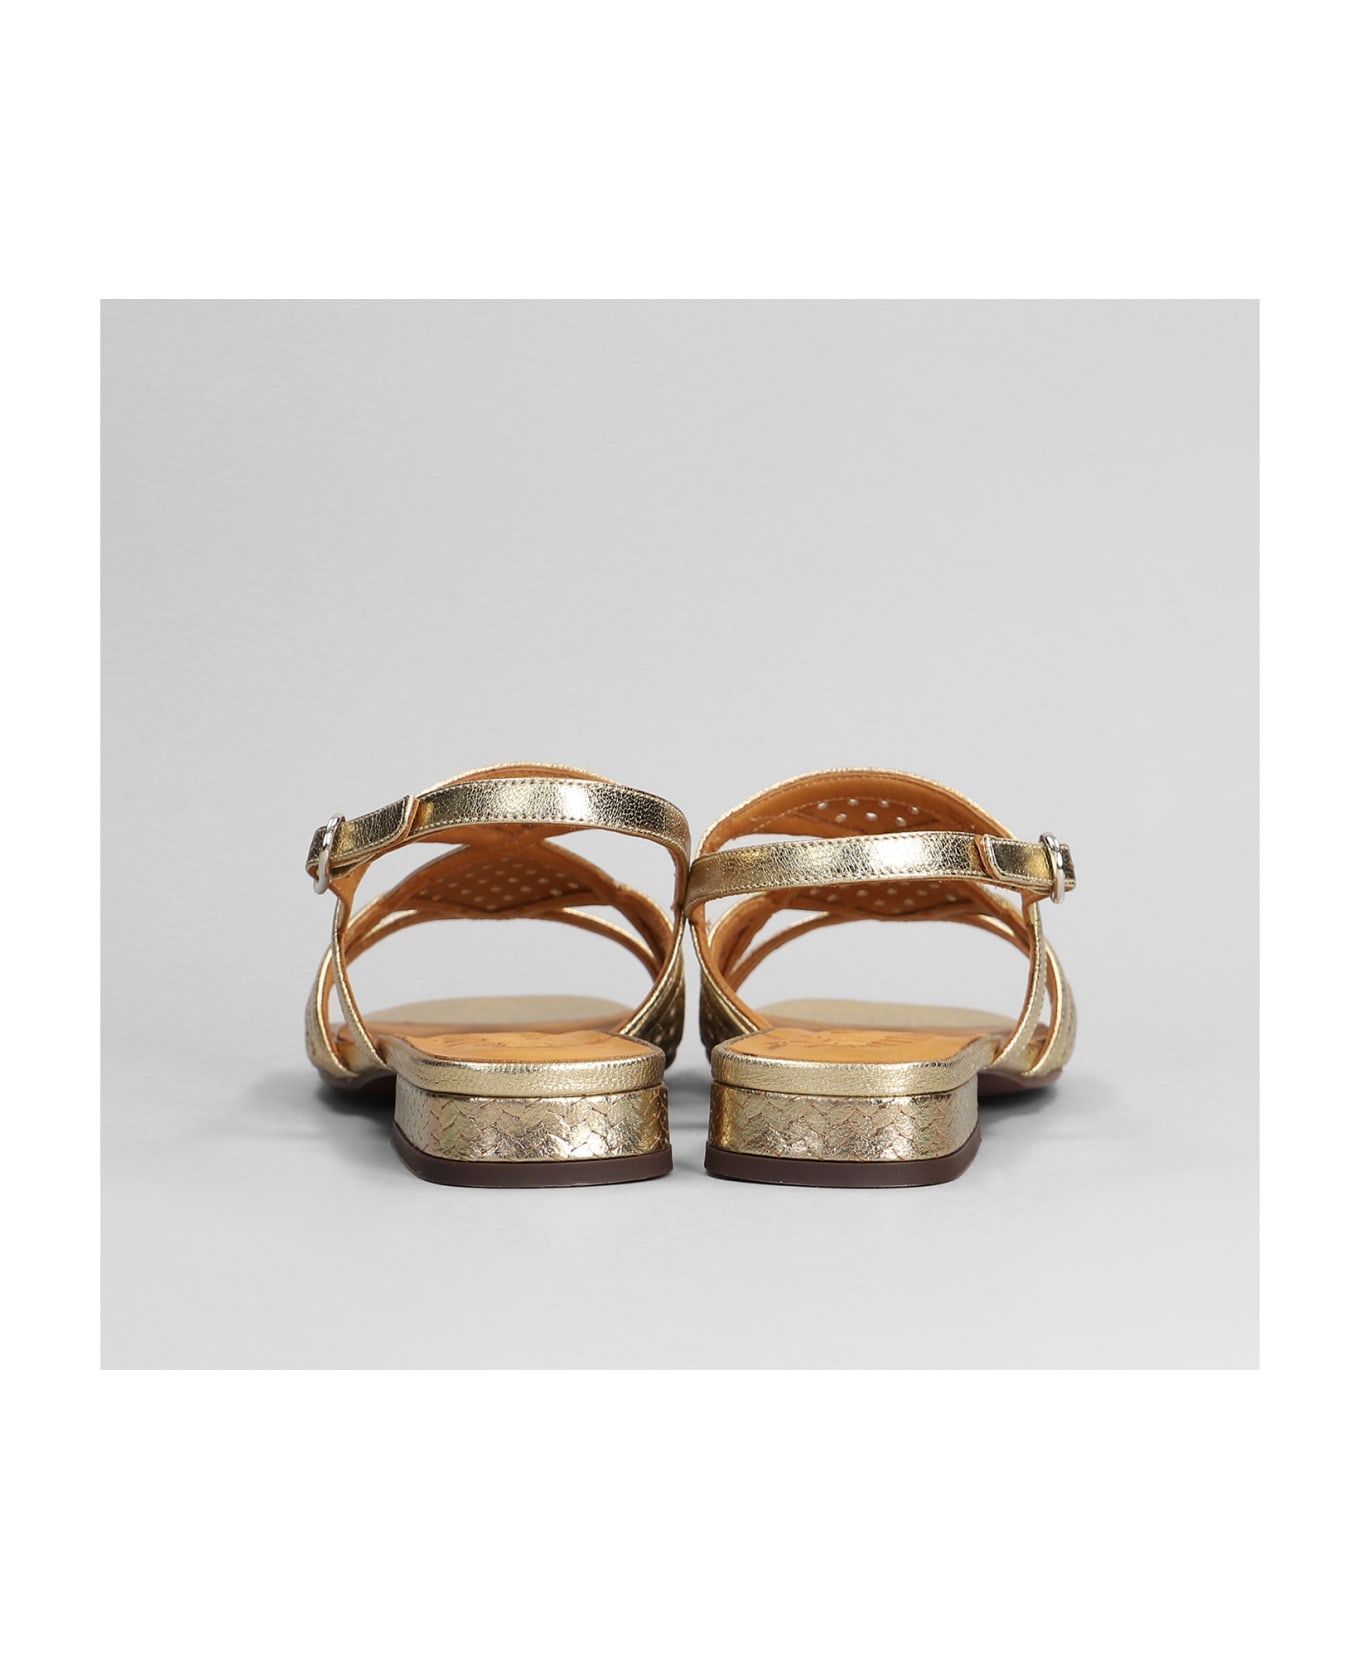 Chie Mihara Tassi Flats In Gold Leather - gold サンダル